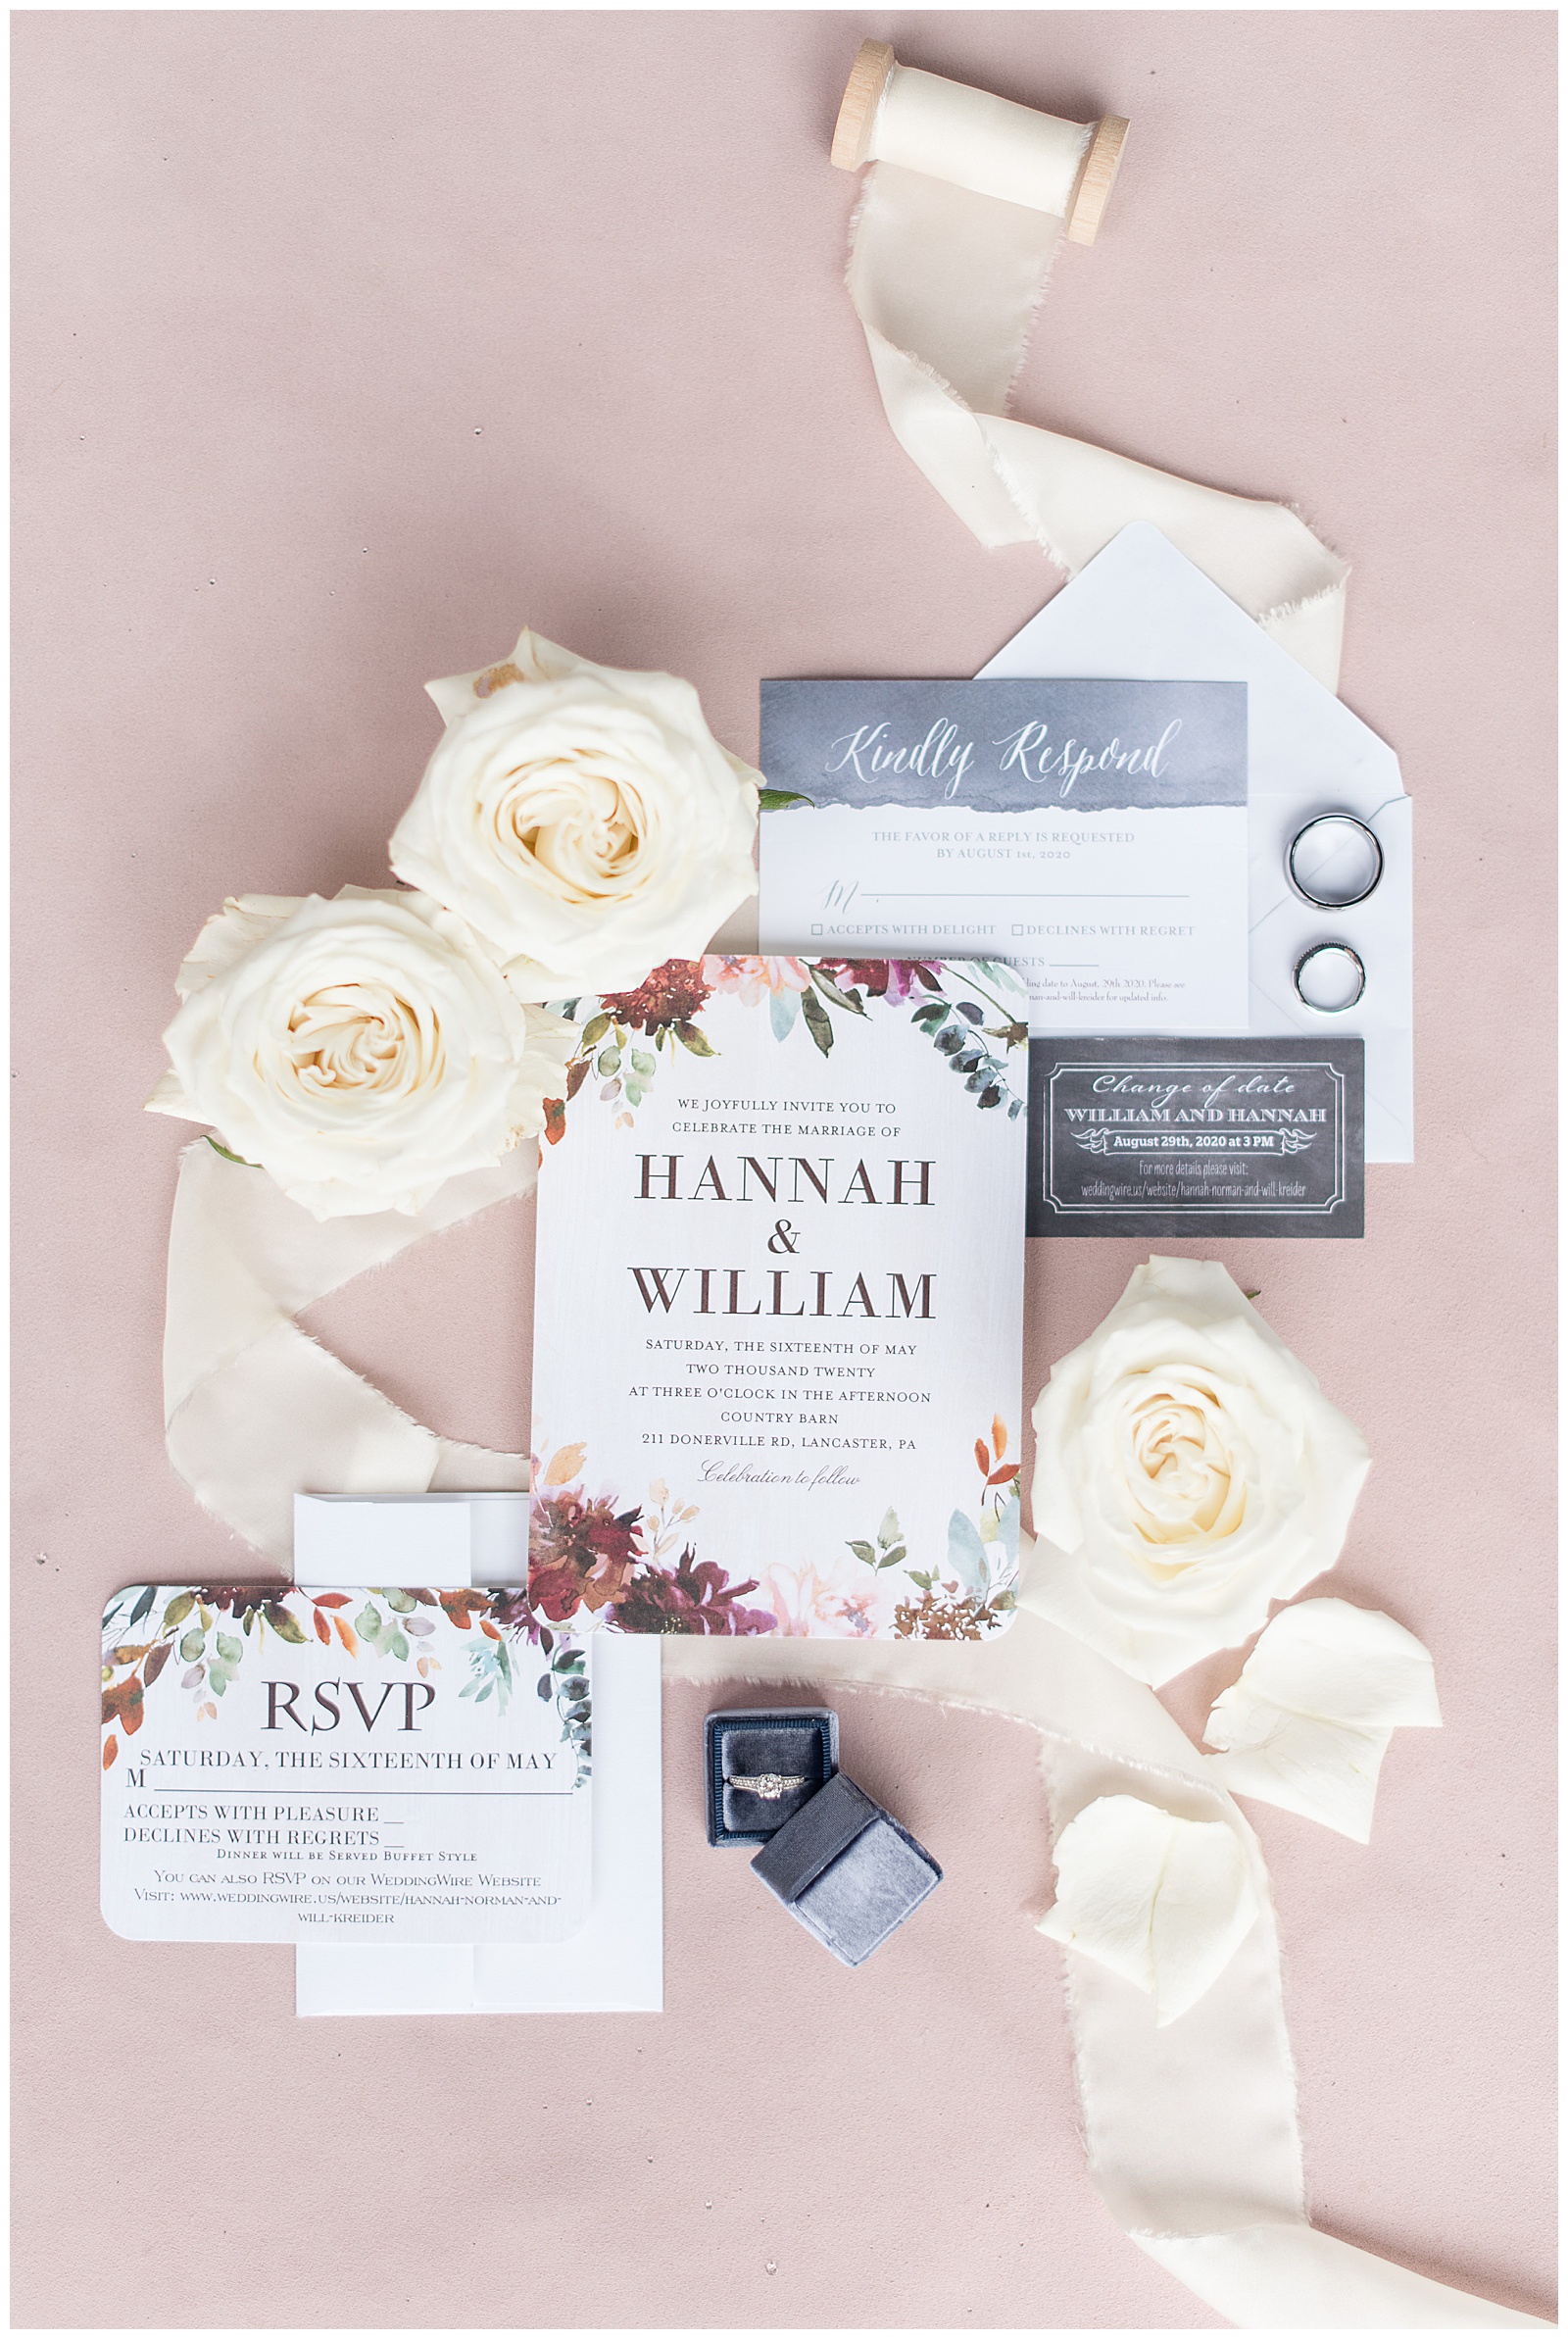 wedding invitation and rings displayed on mauve table with ivory ribbon and roses